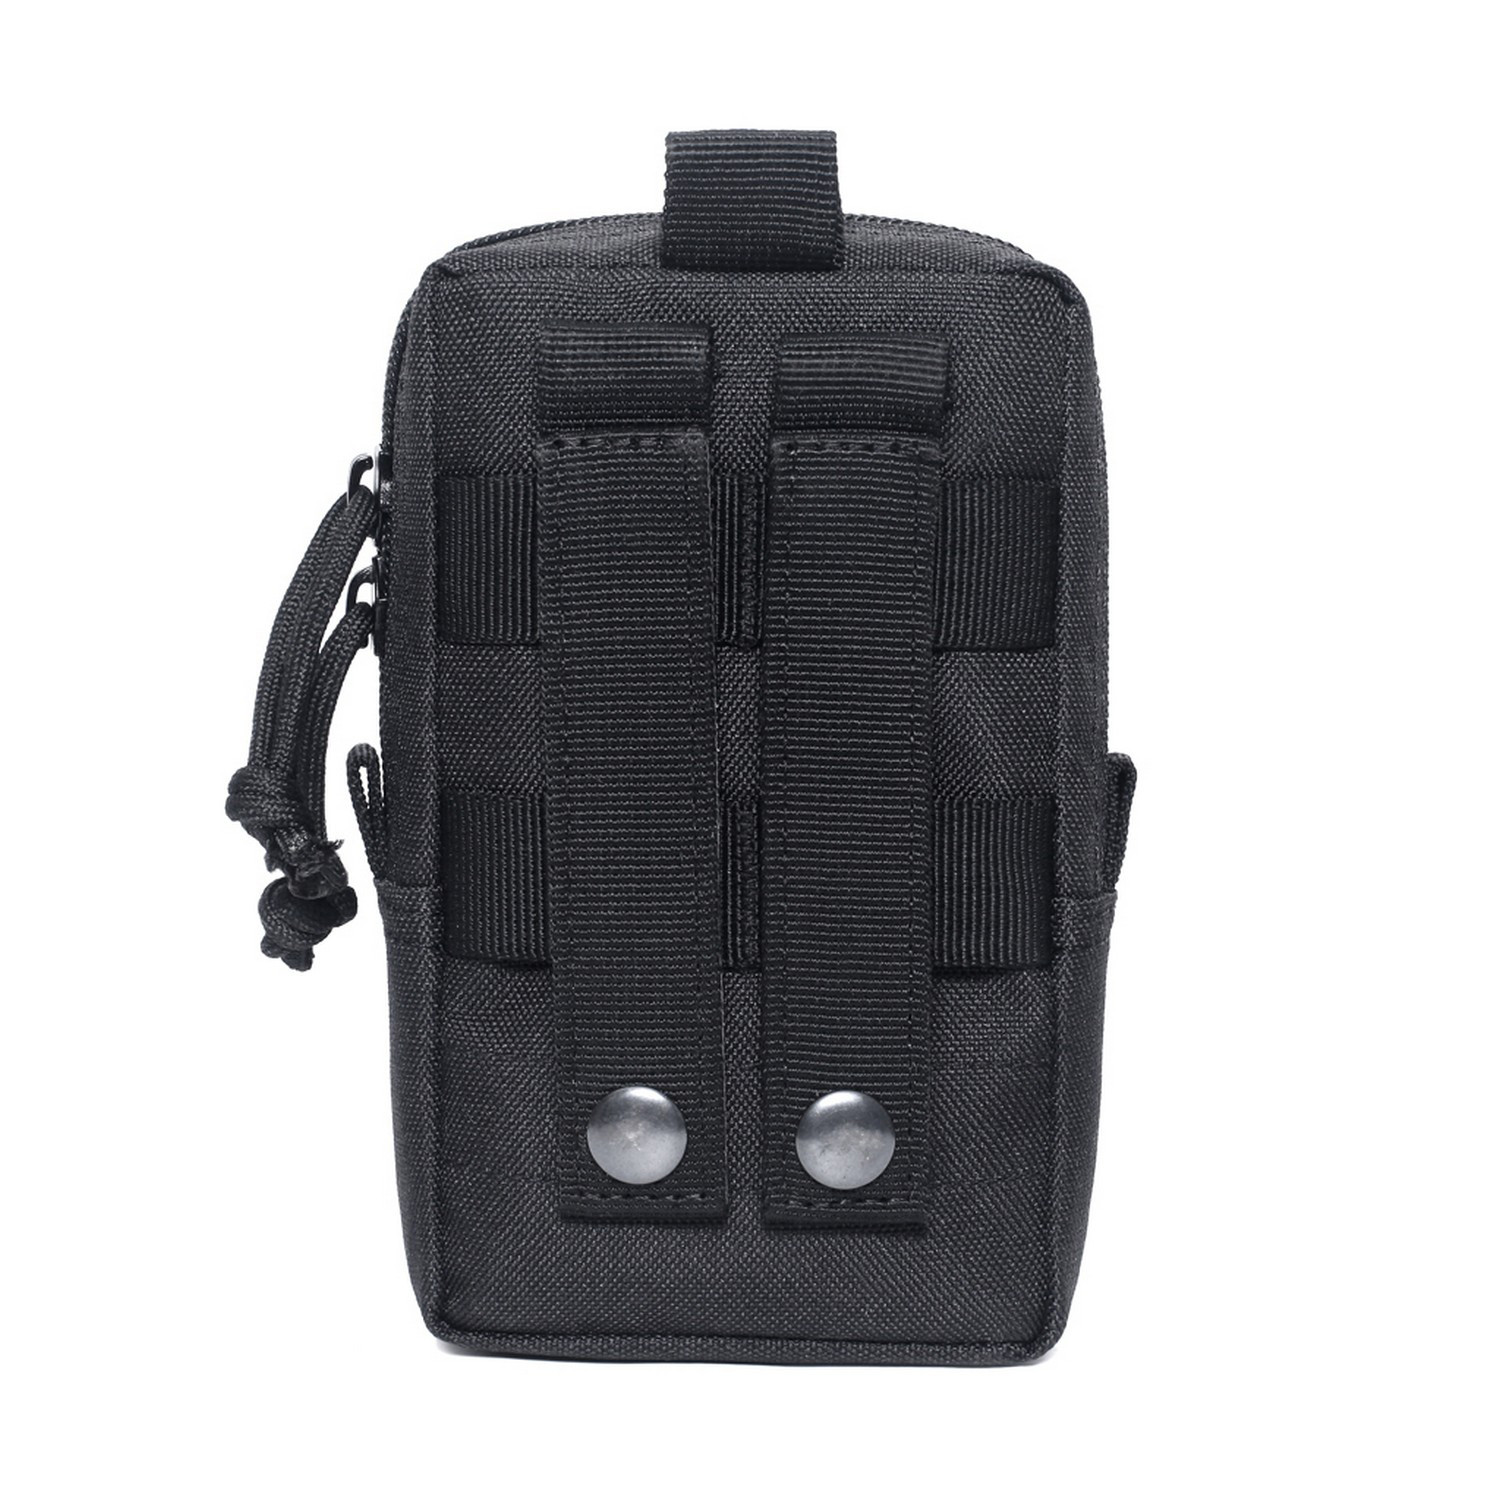 Tactical Waterproof Bag (Black) - M-Tac - Touch of Modern